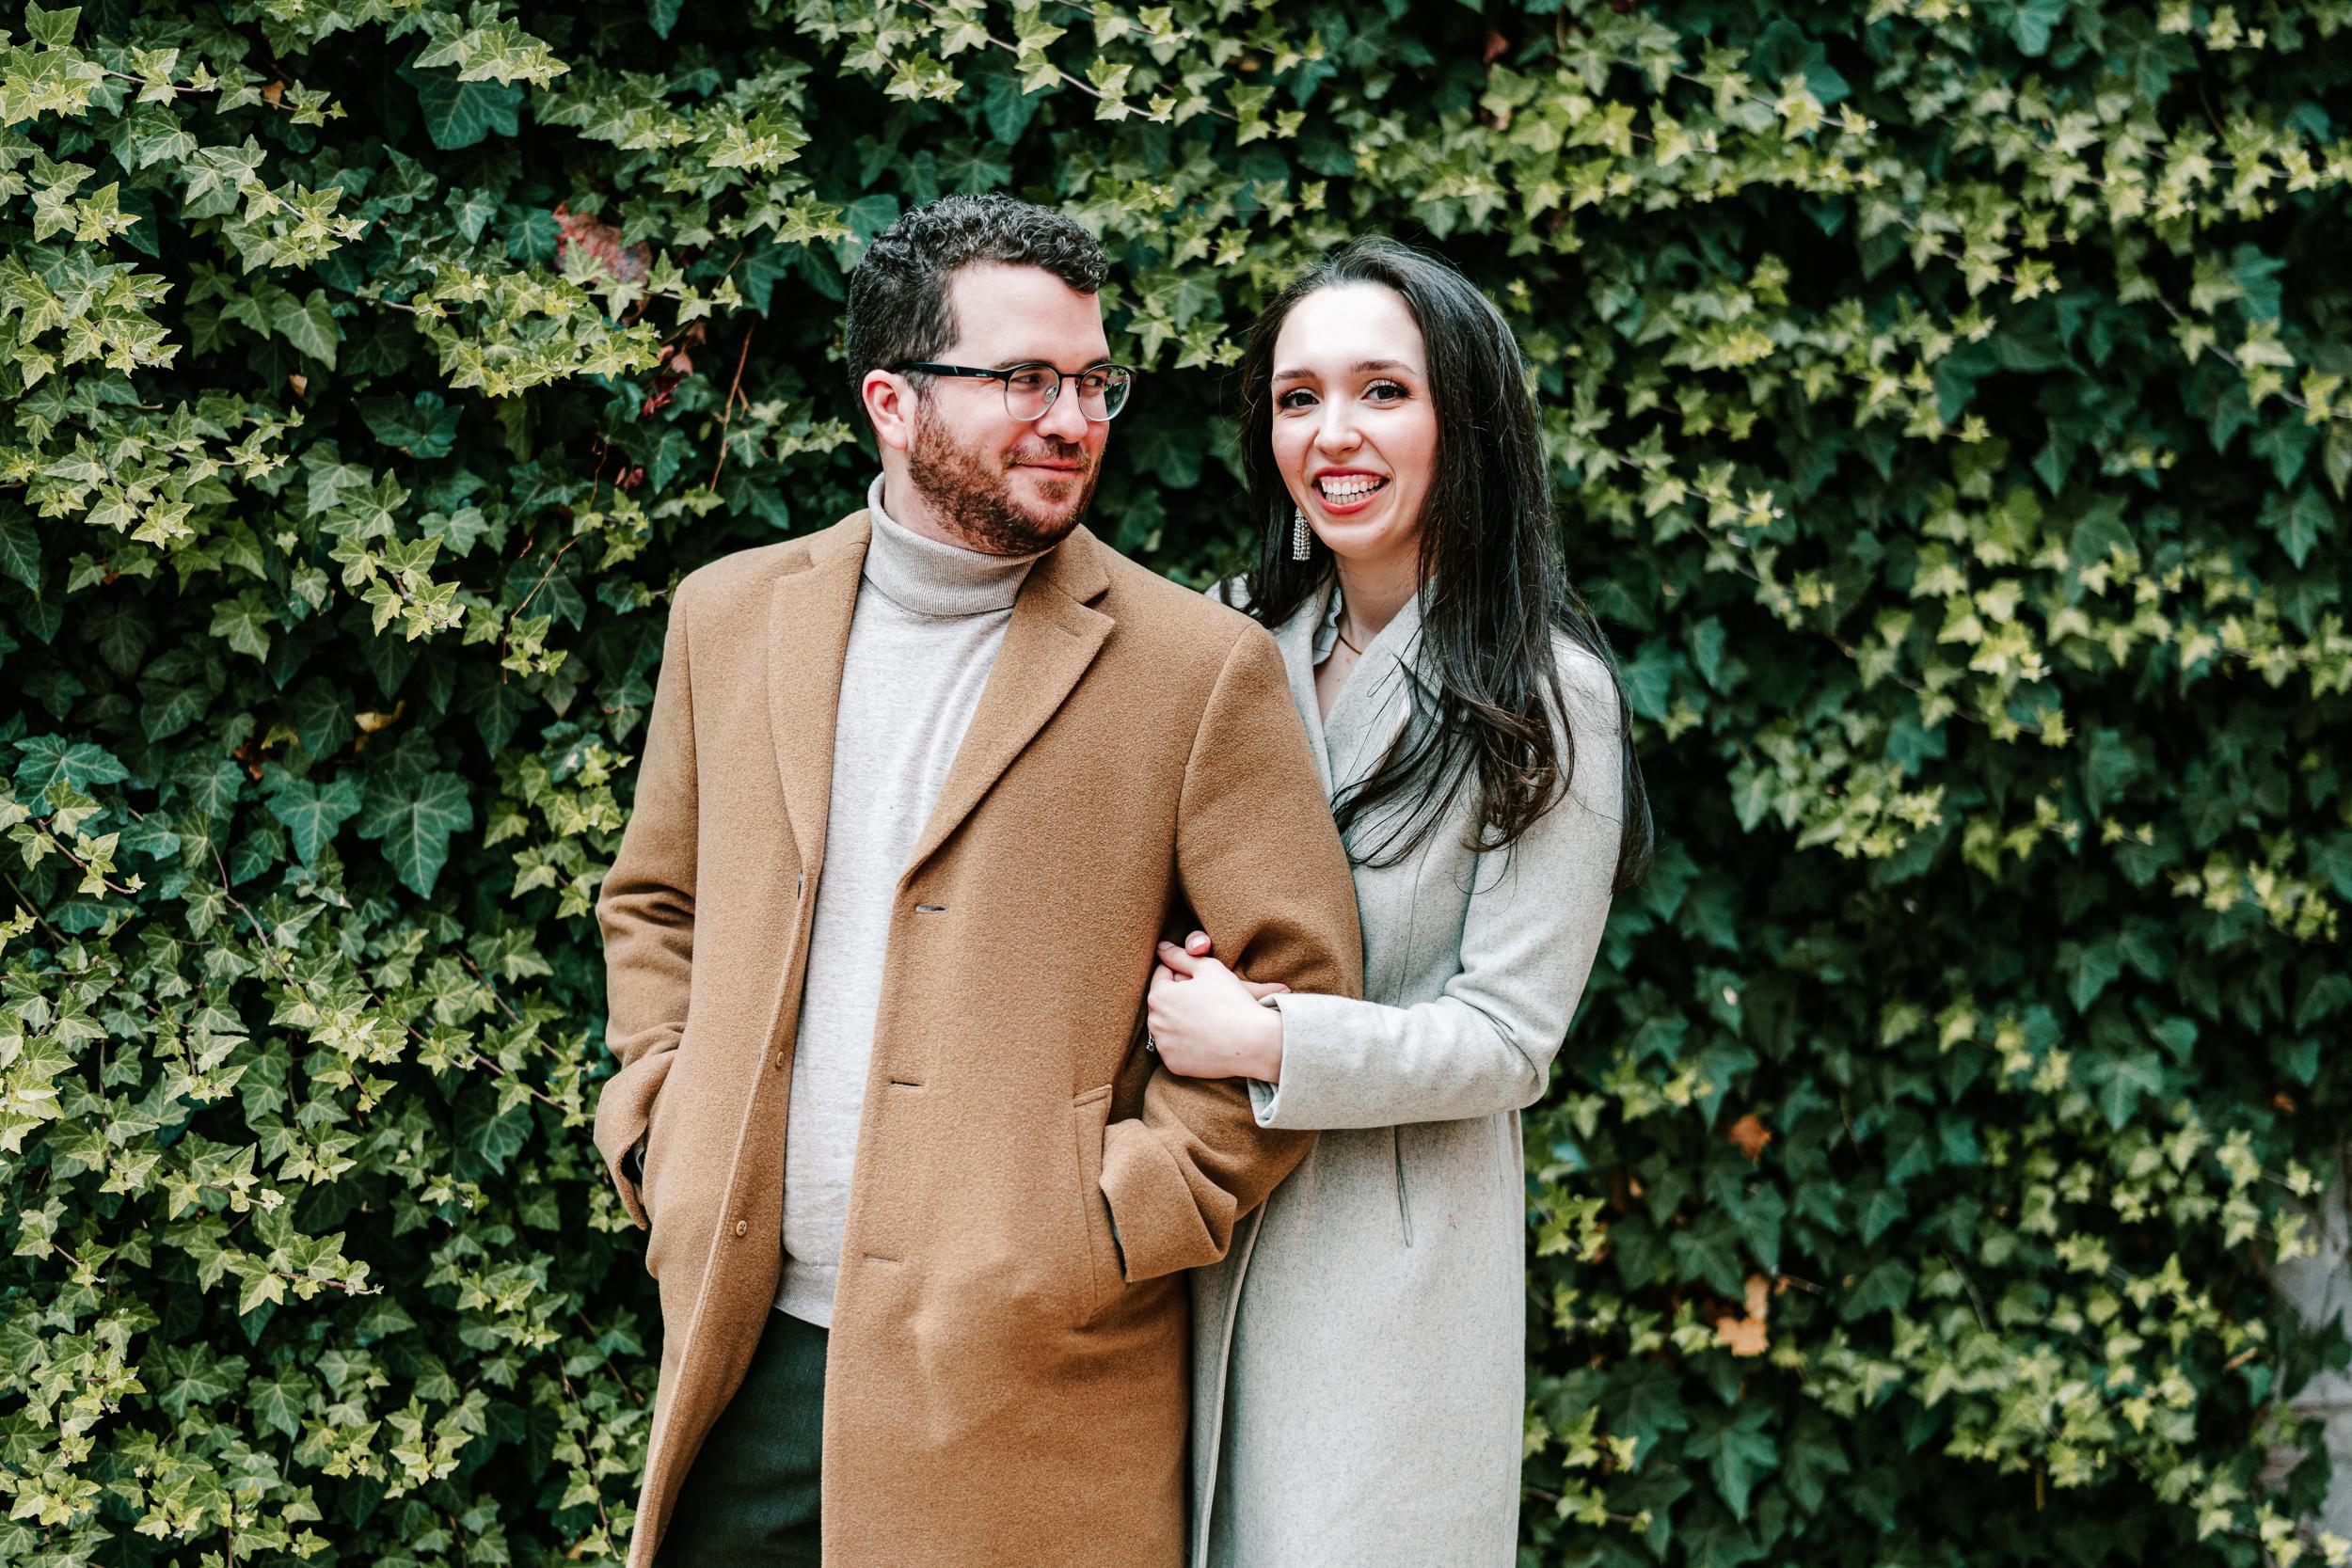 The Wedding Website of Ali Marshall and Jack Byrnes